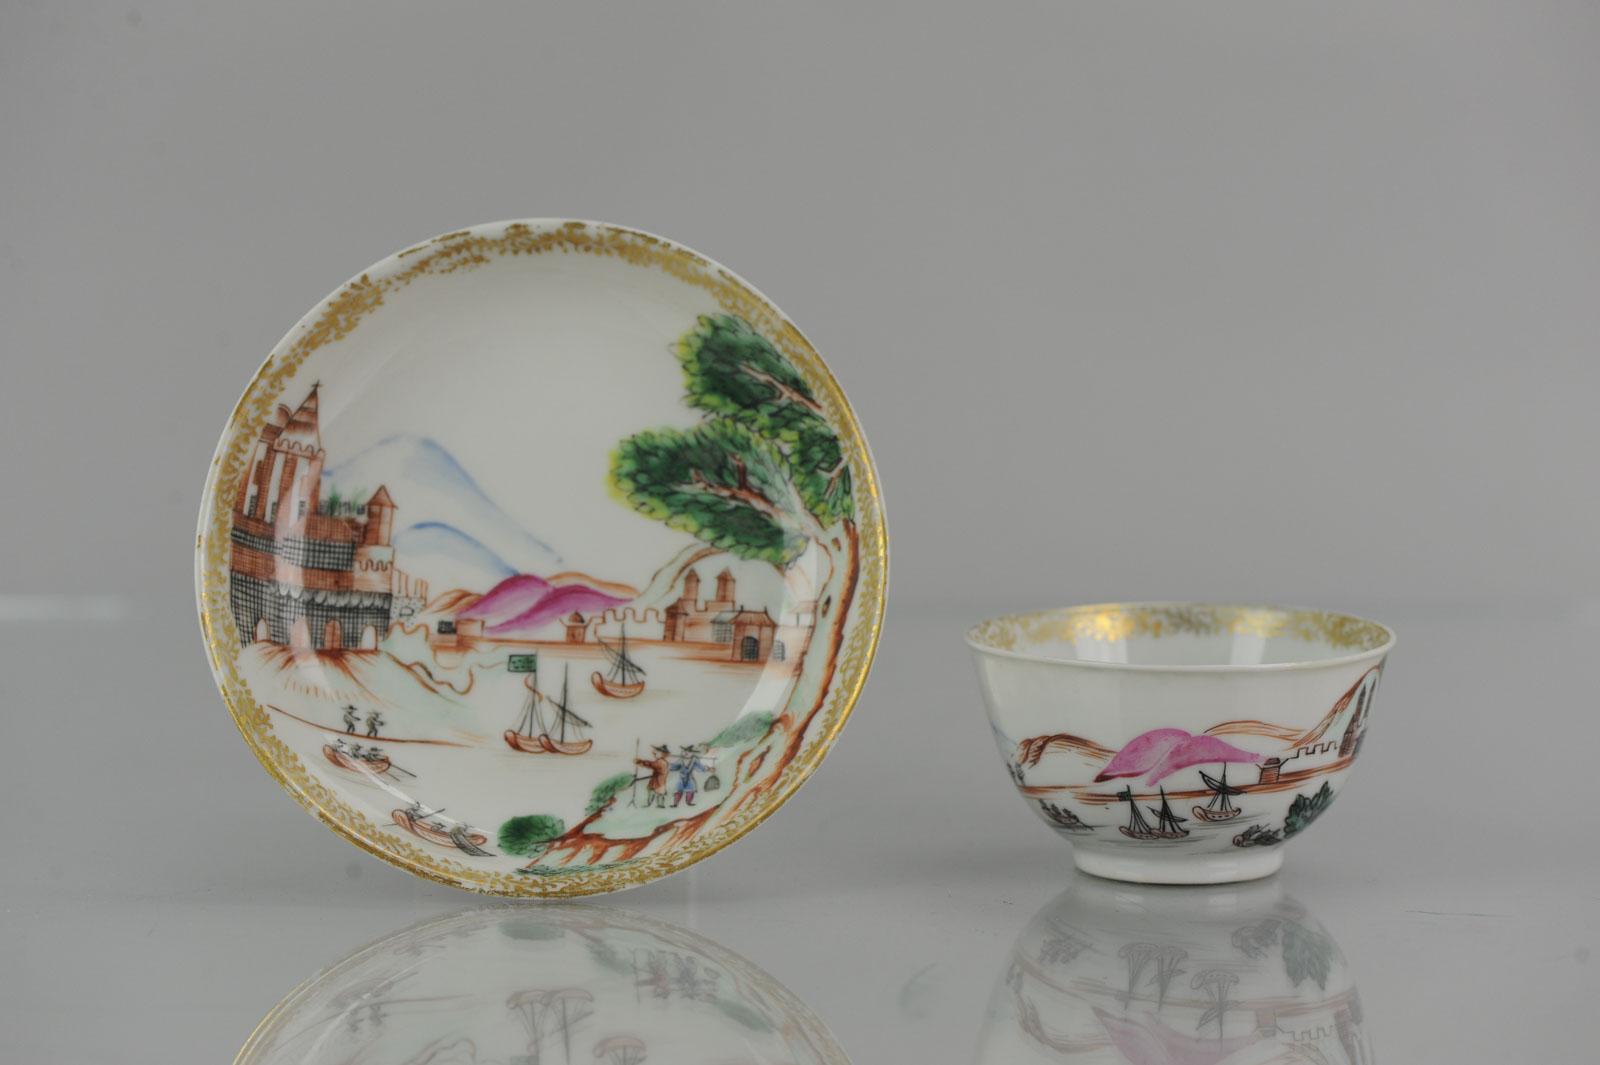 Qing 18C Antique Rare Cup Saucer Chine de commande, Western Subjects Meissen Style For Sale